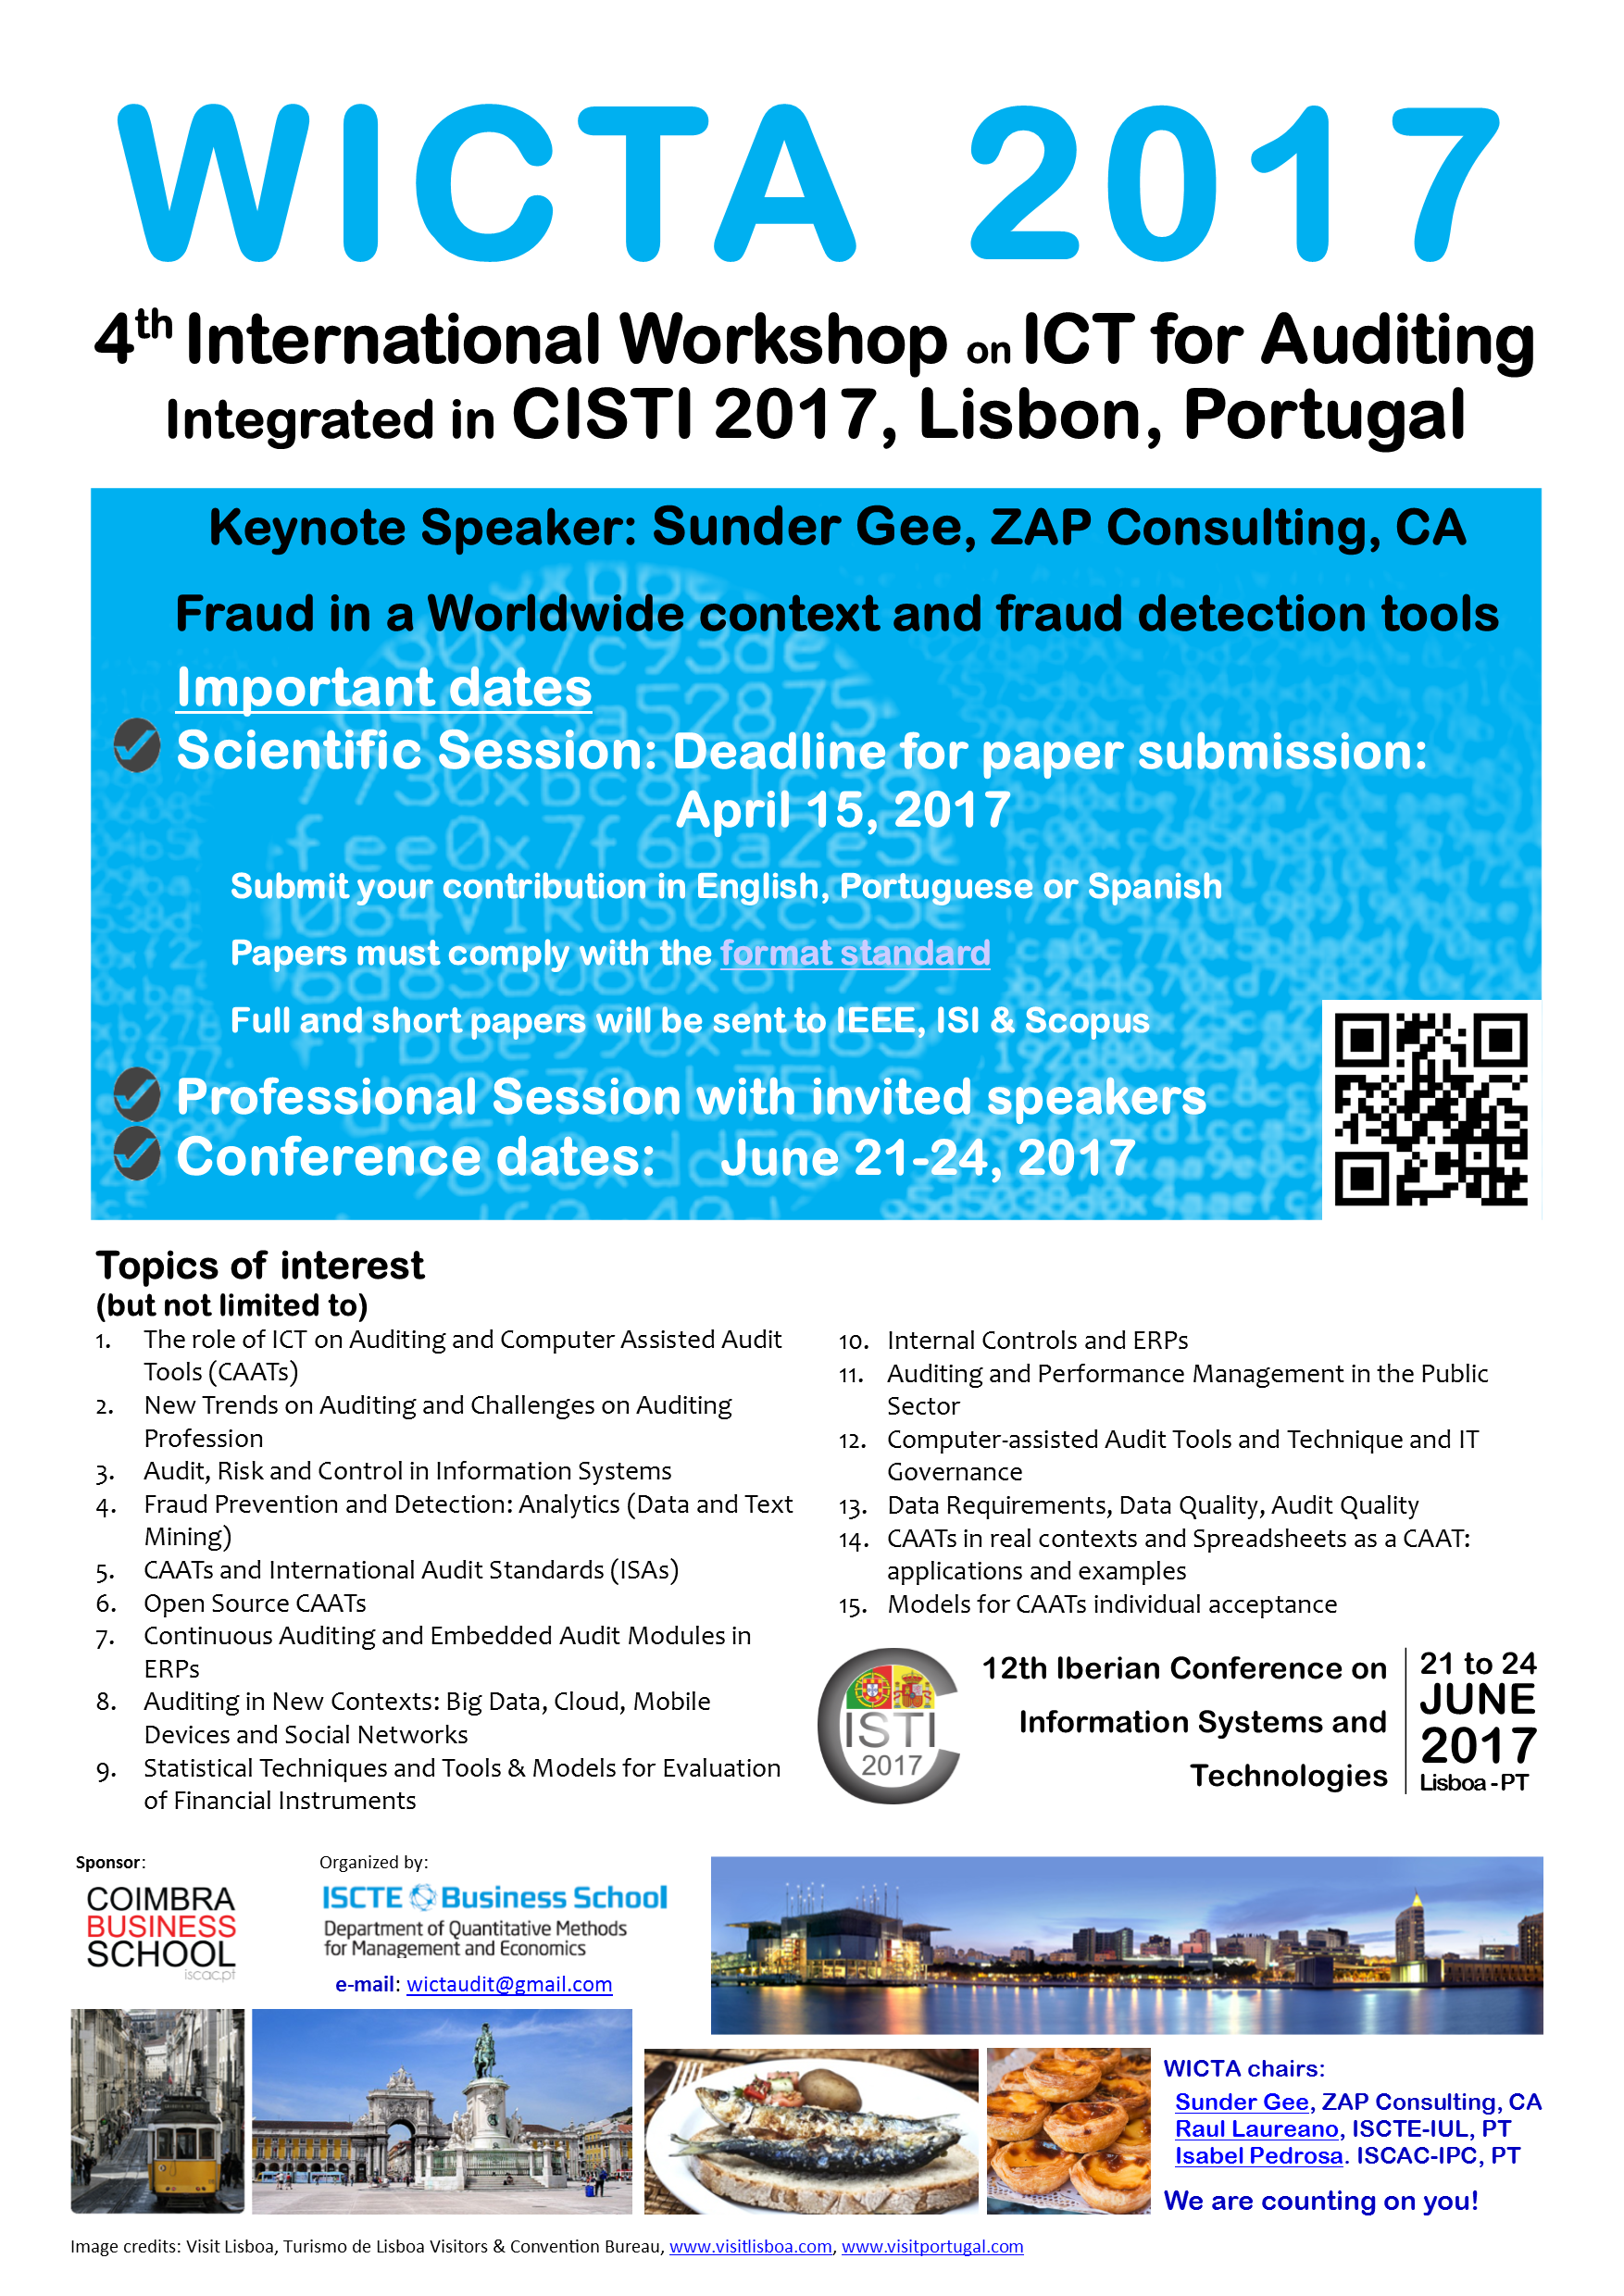 4th International Workshop on ICT for Auditing (WICTA 2017)

This Workshop is integrate at 12th CISTI, Iberian Conference of Information Systems and Technologies. 

Publishing: Papers will be published in CD format, with an ISBN.
Published papers will be sent to EI, IEEE XPlore, INSPEC, ISI, SCOPUS and Google Scholar. Detailed and up-to-date information may be found at http://cisti.eu/index.php/en/workshops/wicta
This event integrates more than 60 members in the Programme Committee from 21 contries. 
WICTA 2017 organizers are aware of the challenges of Information and Communication Technologies for Auditing purposes among auditors. WICTA 2017 edition includes  Professional Session and a Scientific/Research Session. 